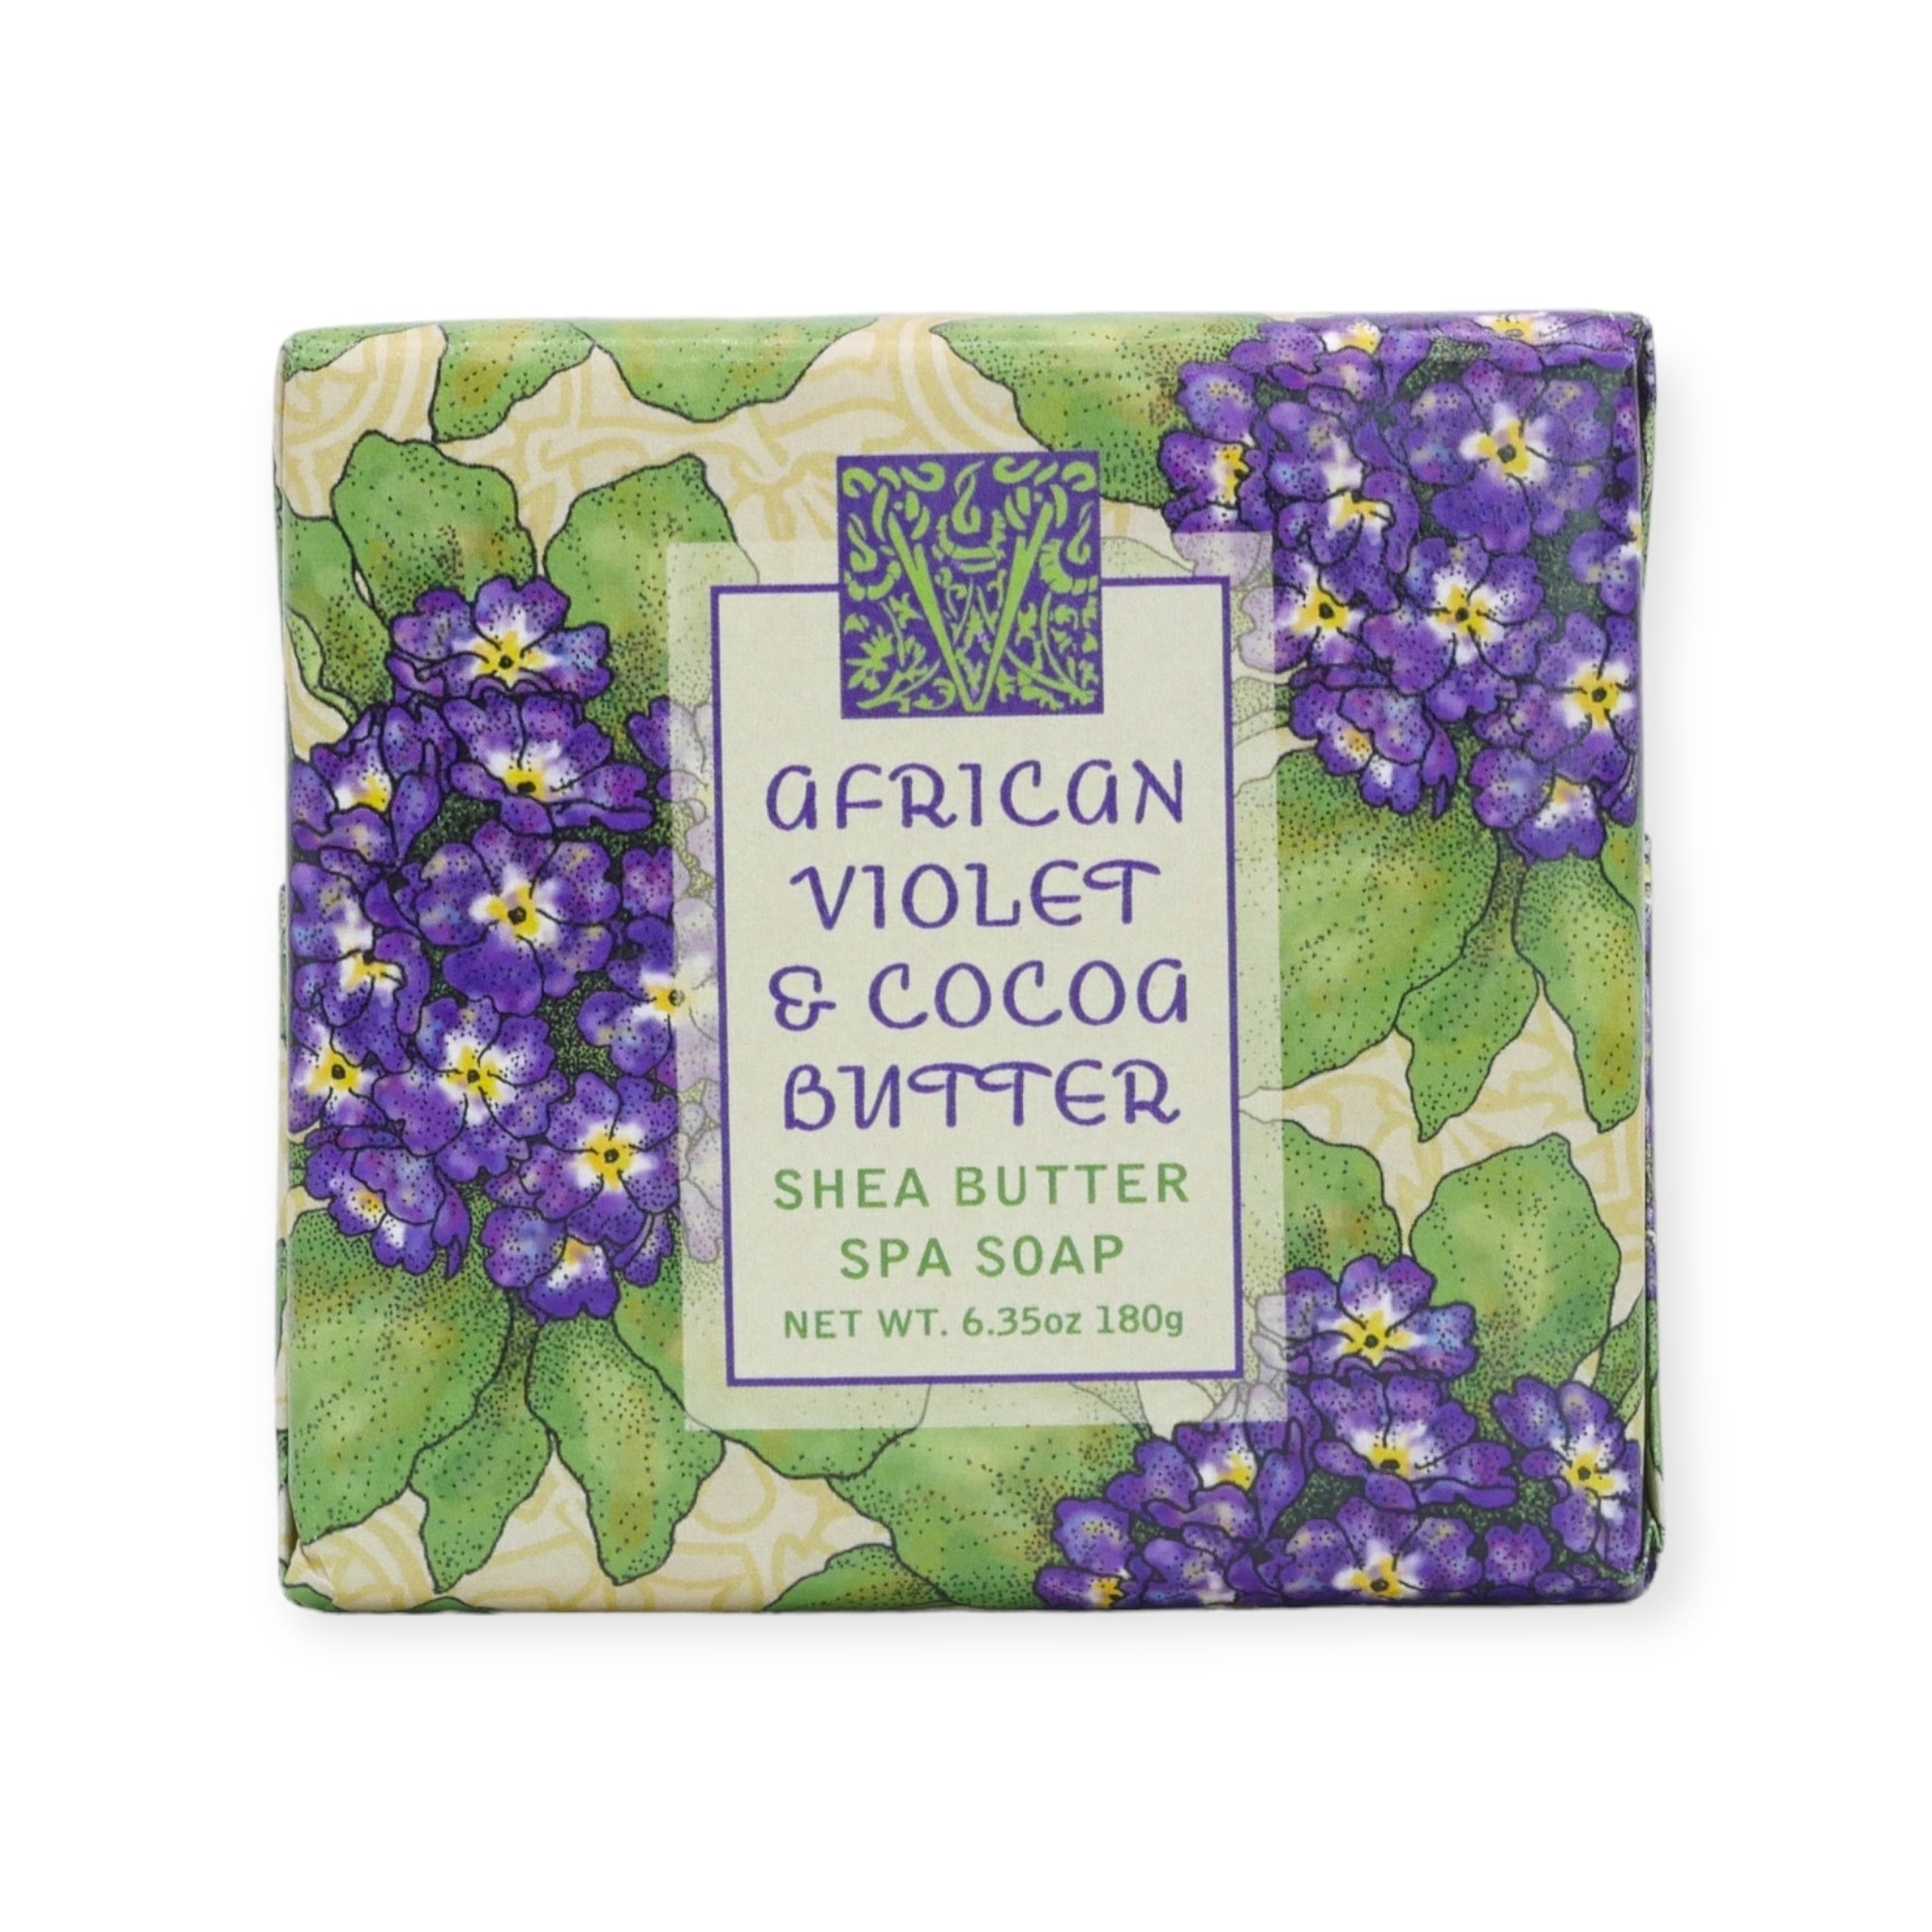 African Violet & Cocoa Butter Shea Butter Spa Soap by Greenwich Bay Trading Co.